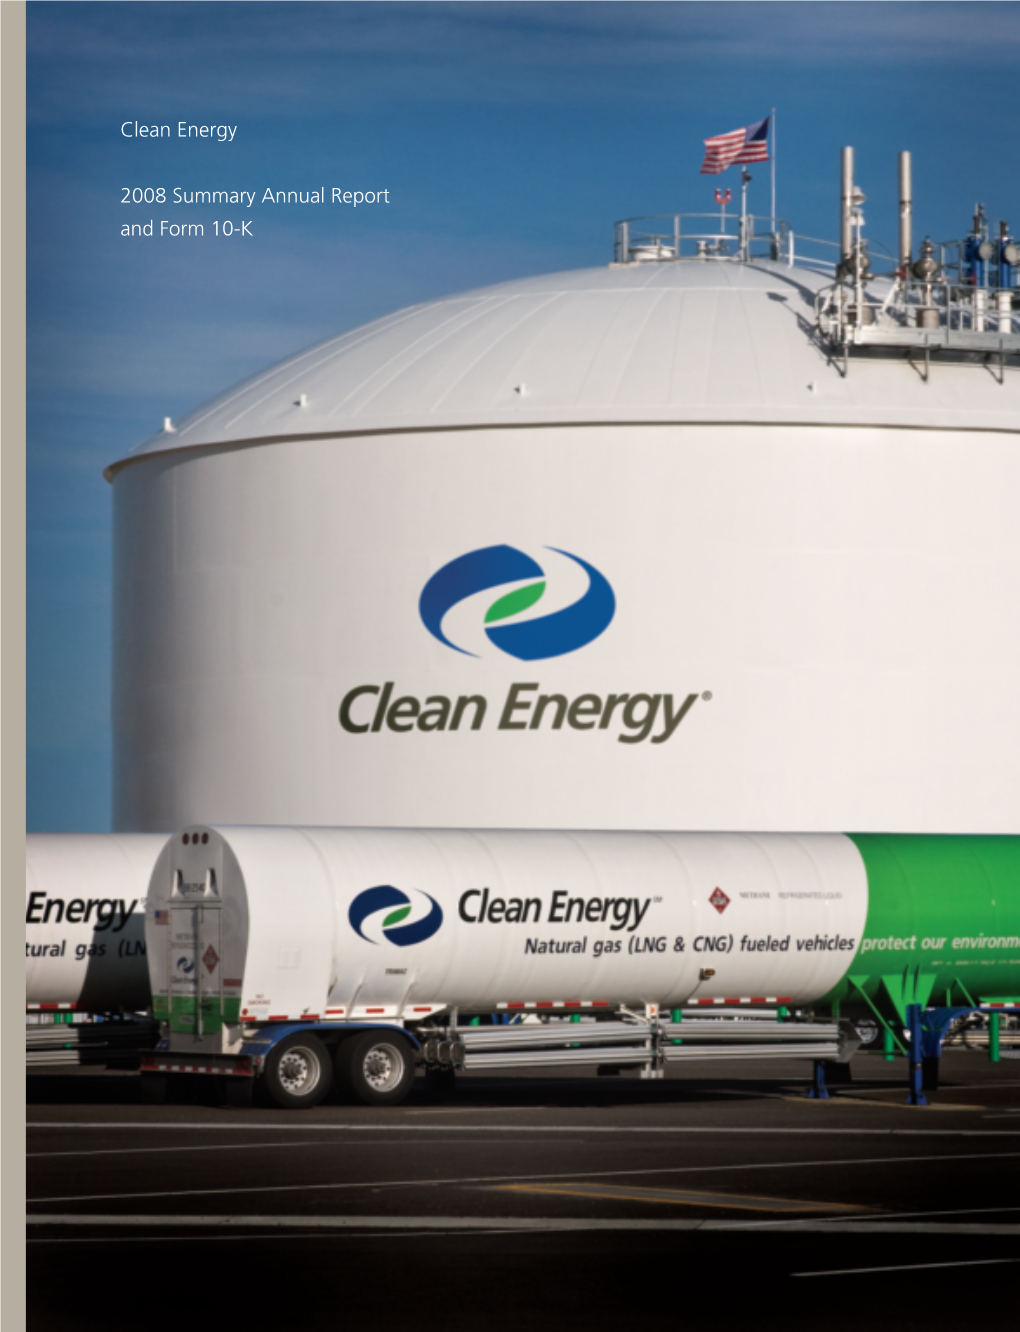 Clean Energy 2008 Summary Annual Report and Form 10-K